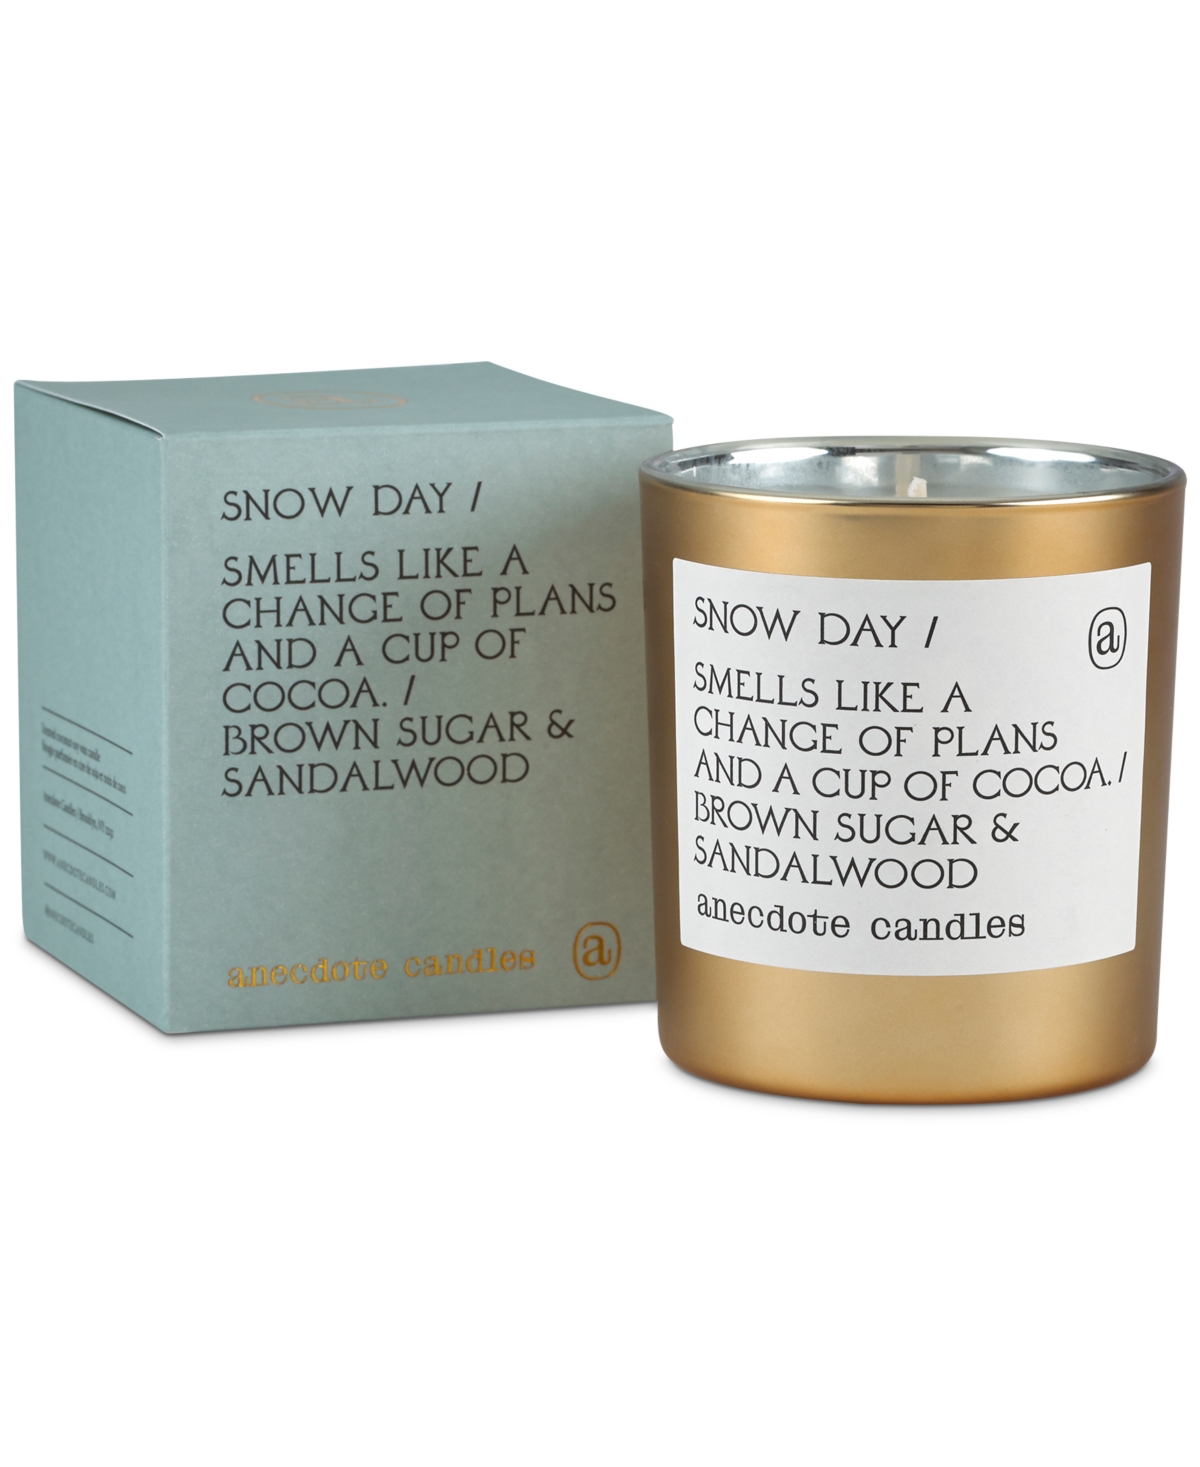 Snow Day Smells Like A Change Of Plans and A Cup of Cocoa Candle, 9-oz.